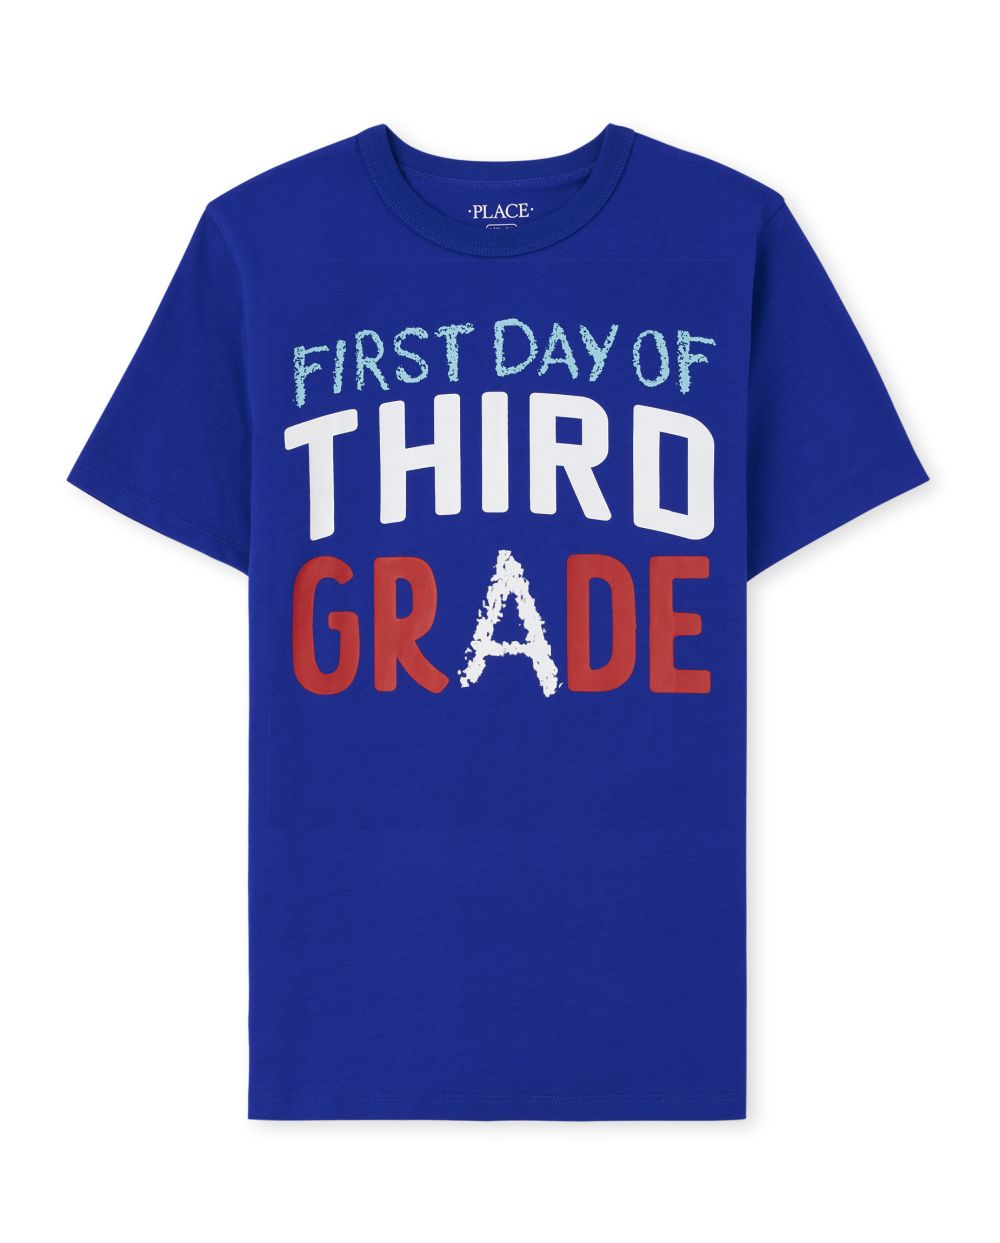 The Children's Place Boys Third Grade Graphic Tee - Blue - M (7/8)